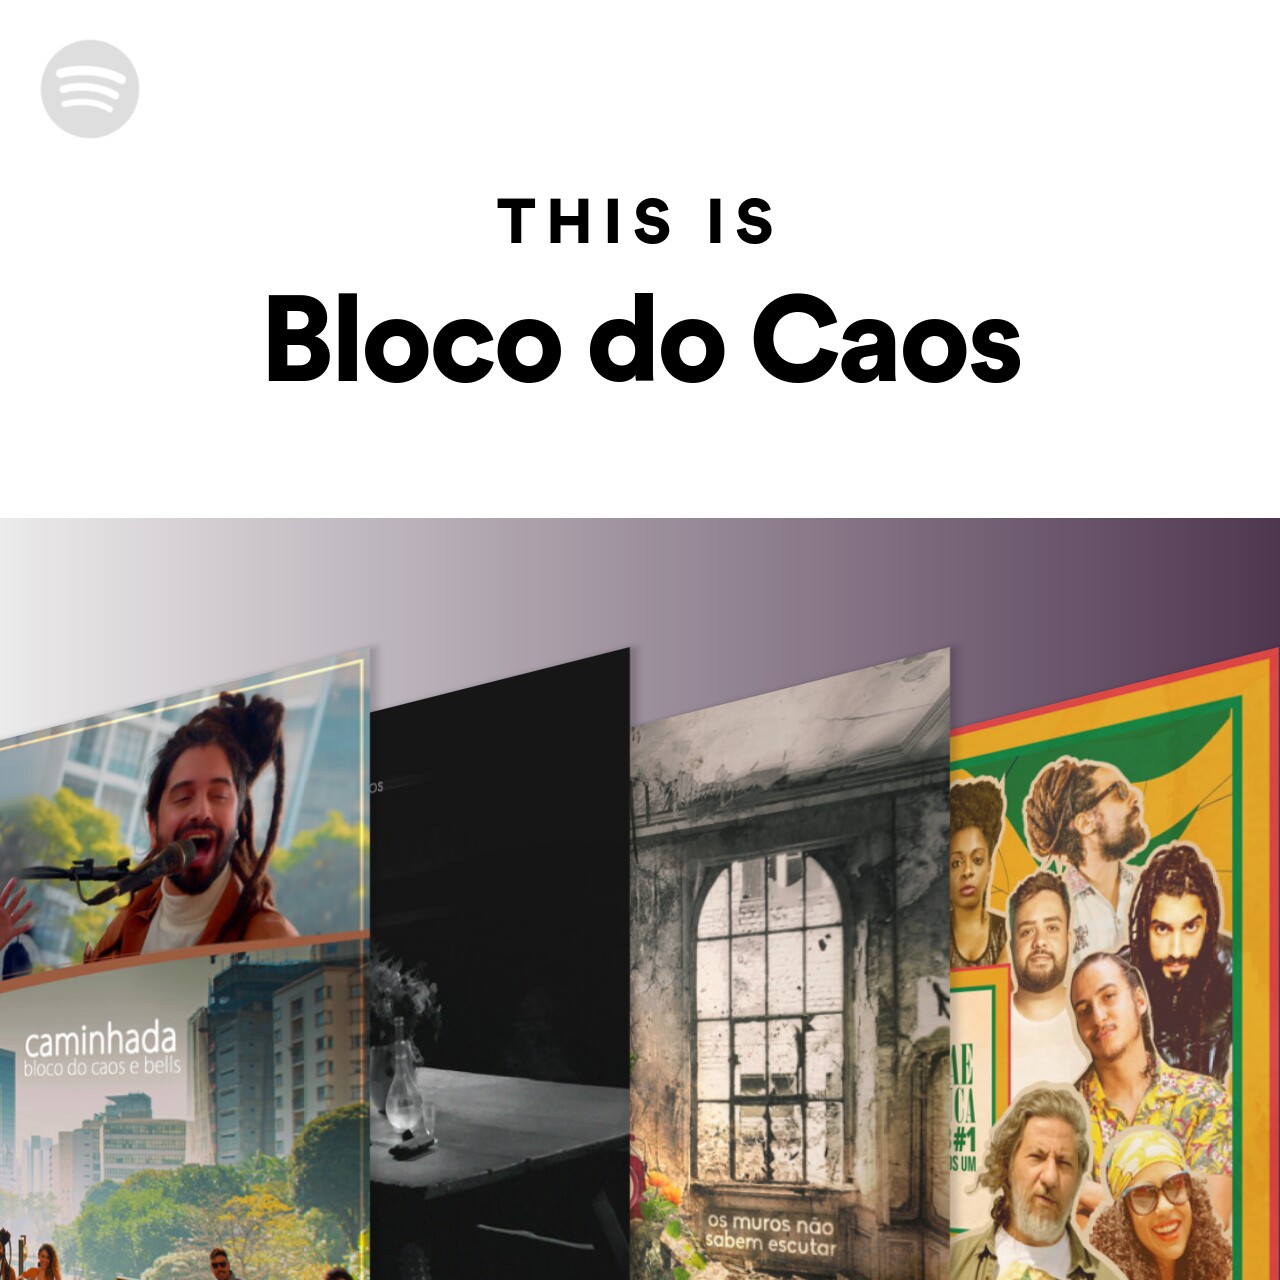 This Is Bloco do Caos